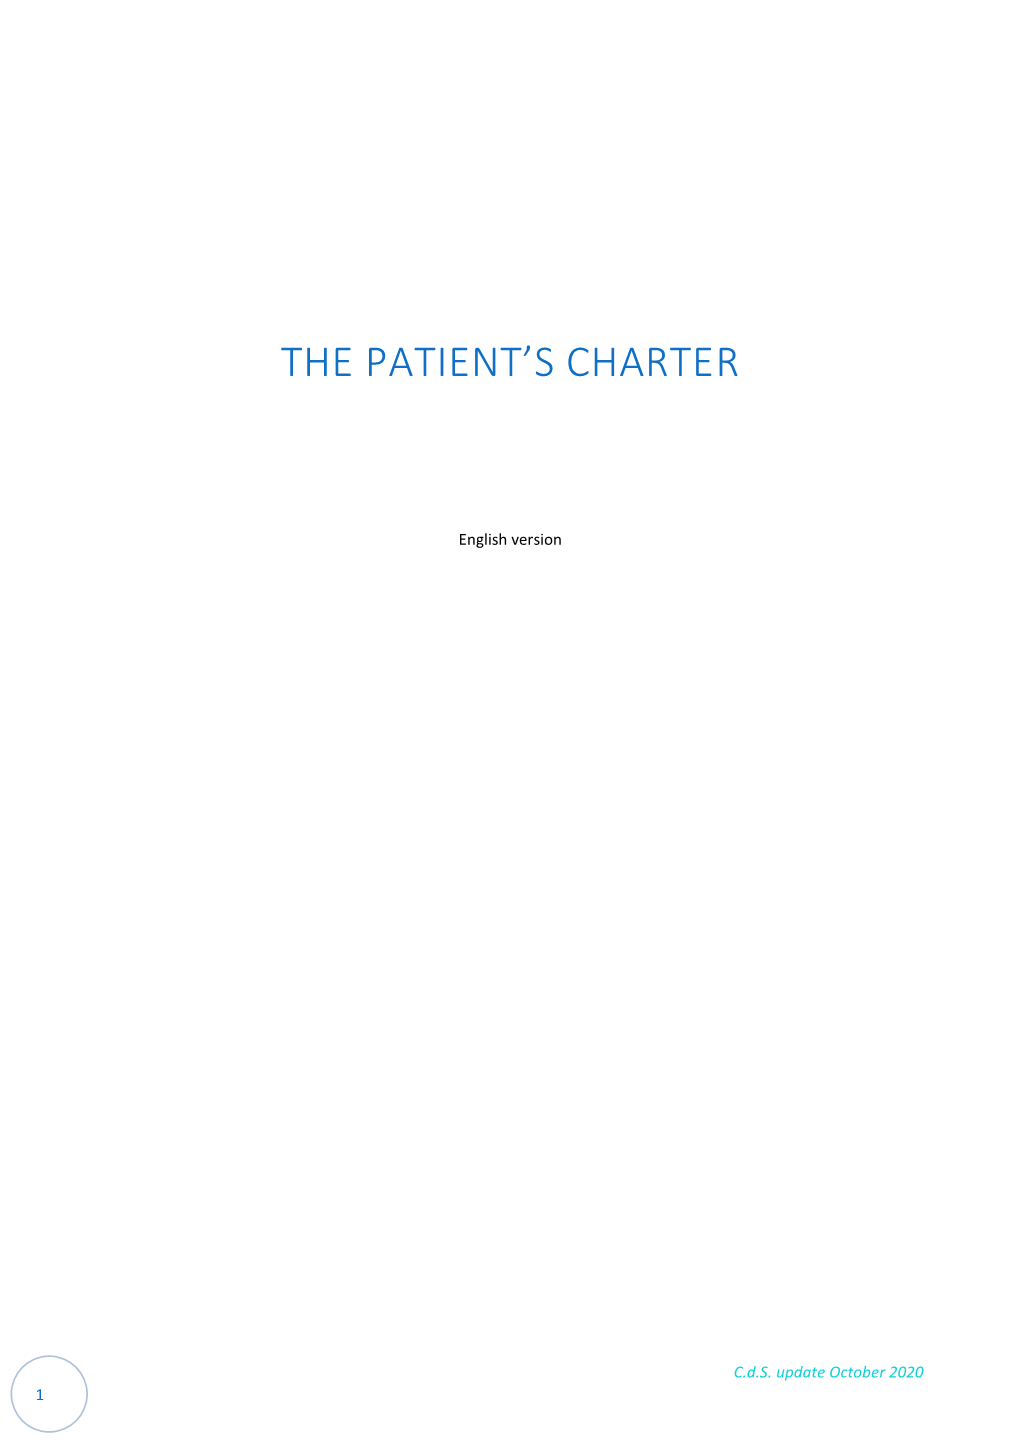 The Patient's Charter